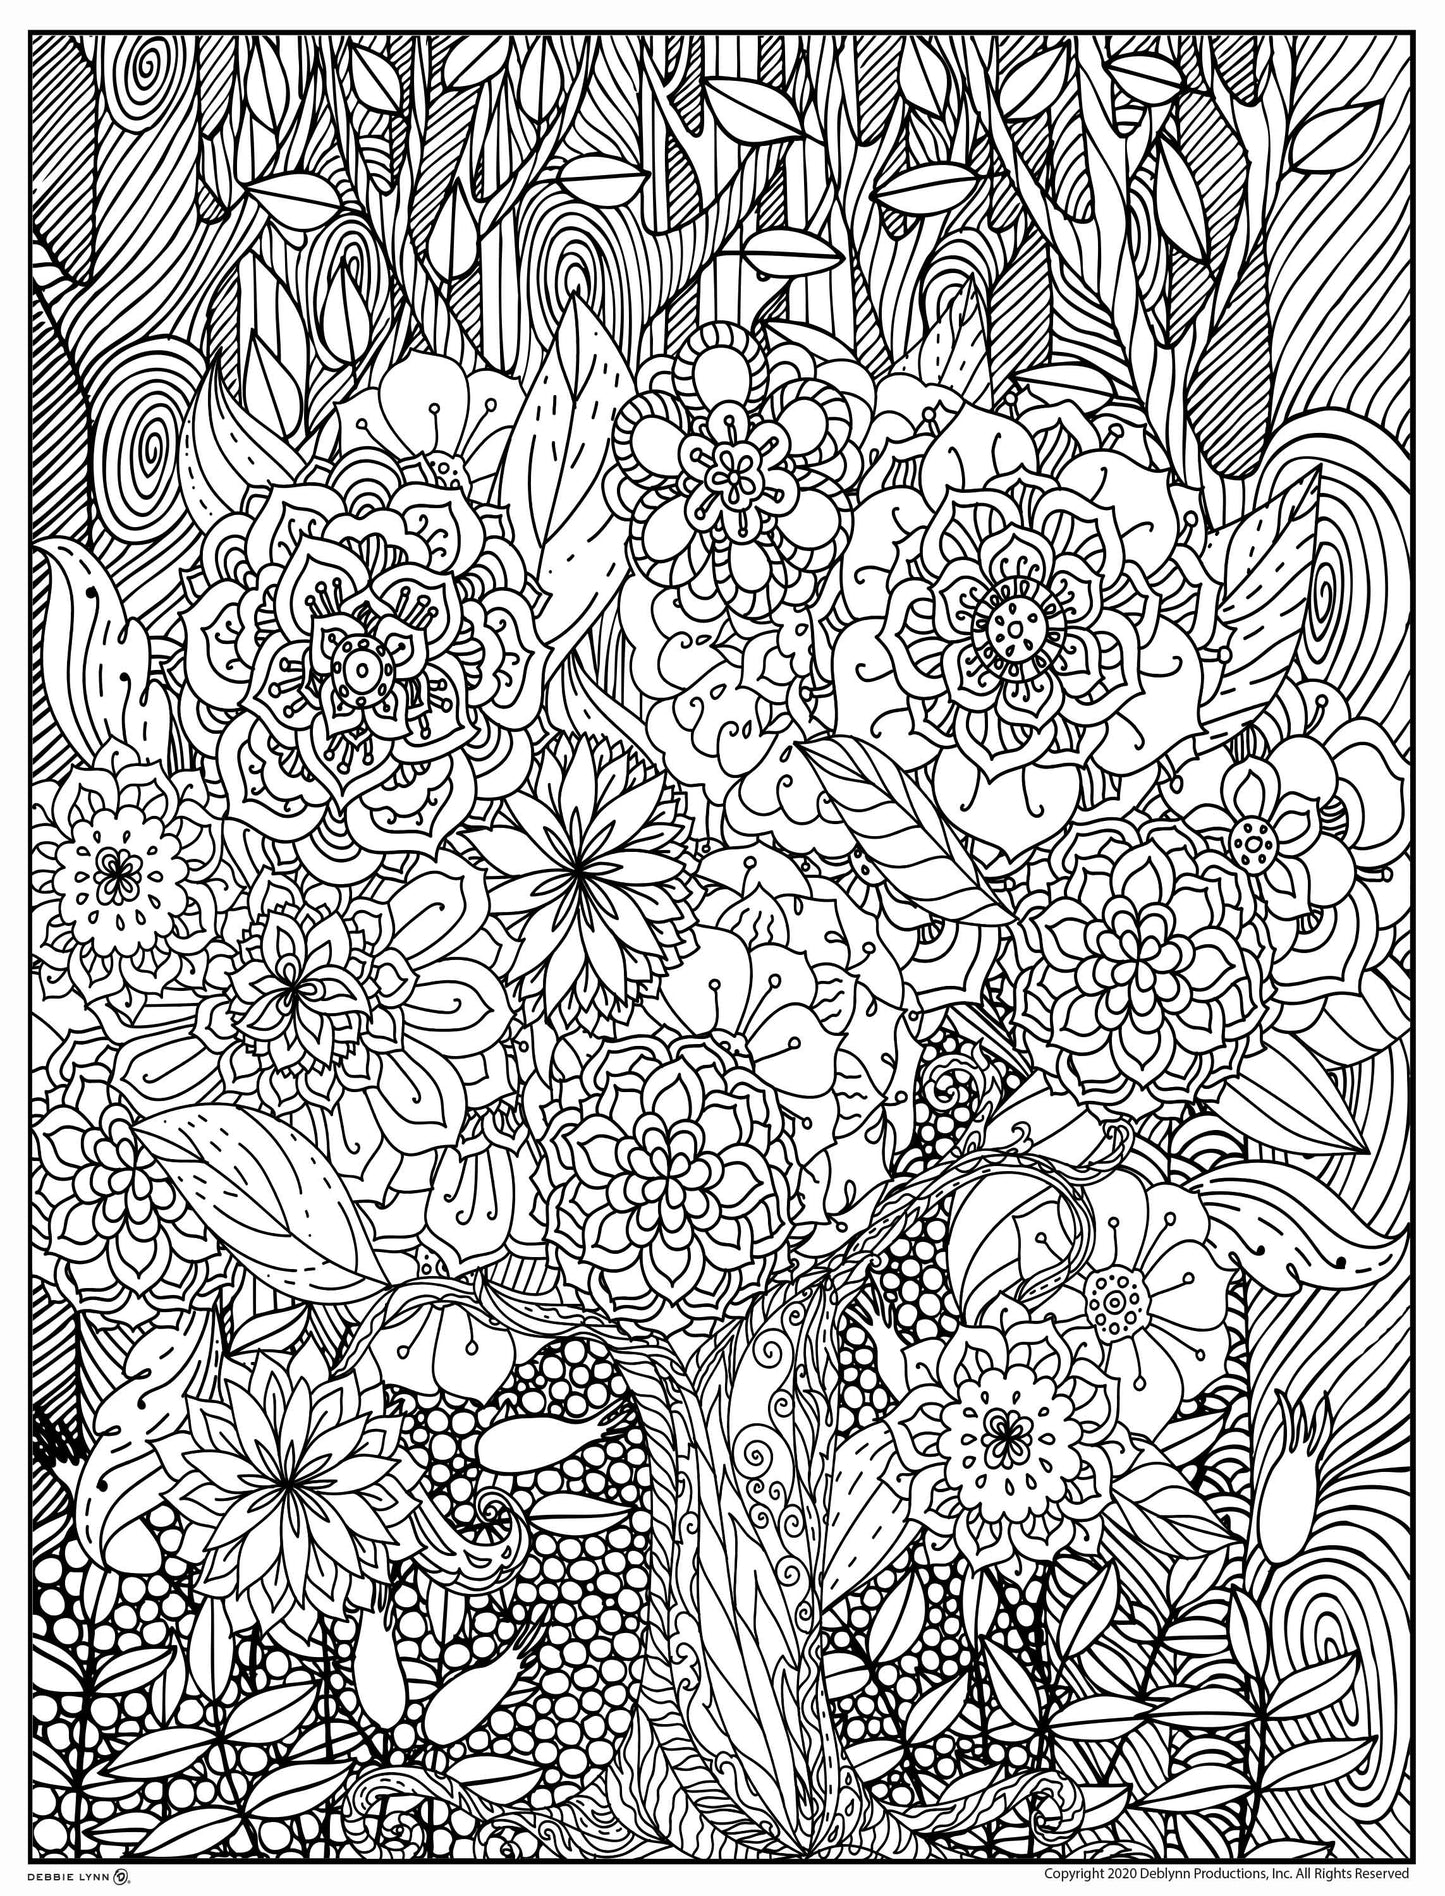 Tree of Life Personalized Giant Coloring Poster 46"x60"